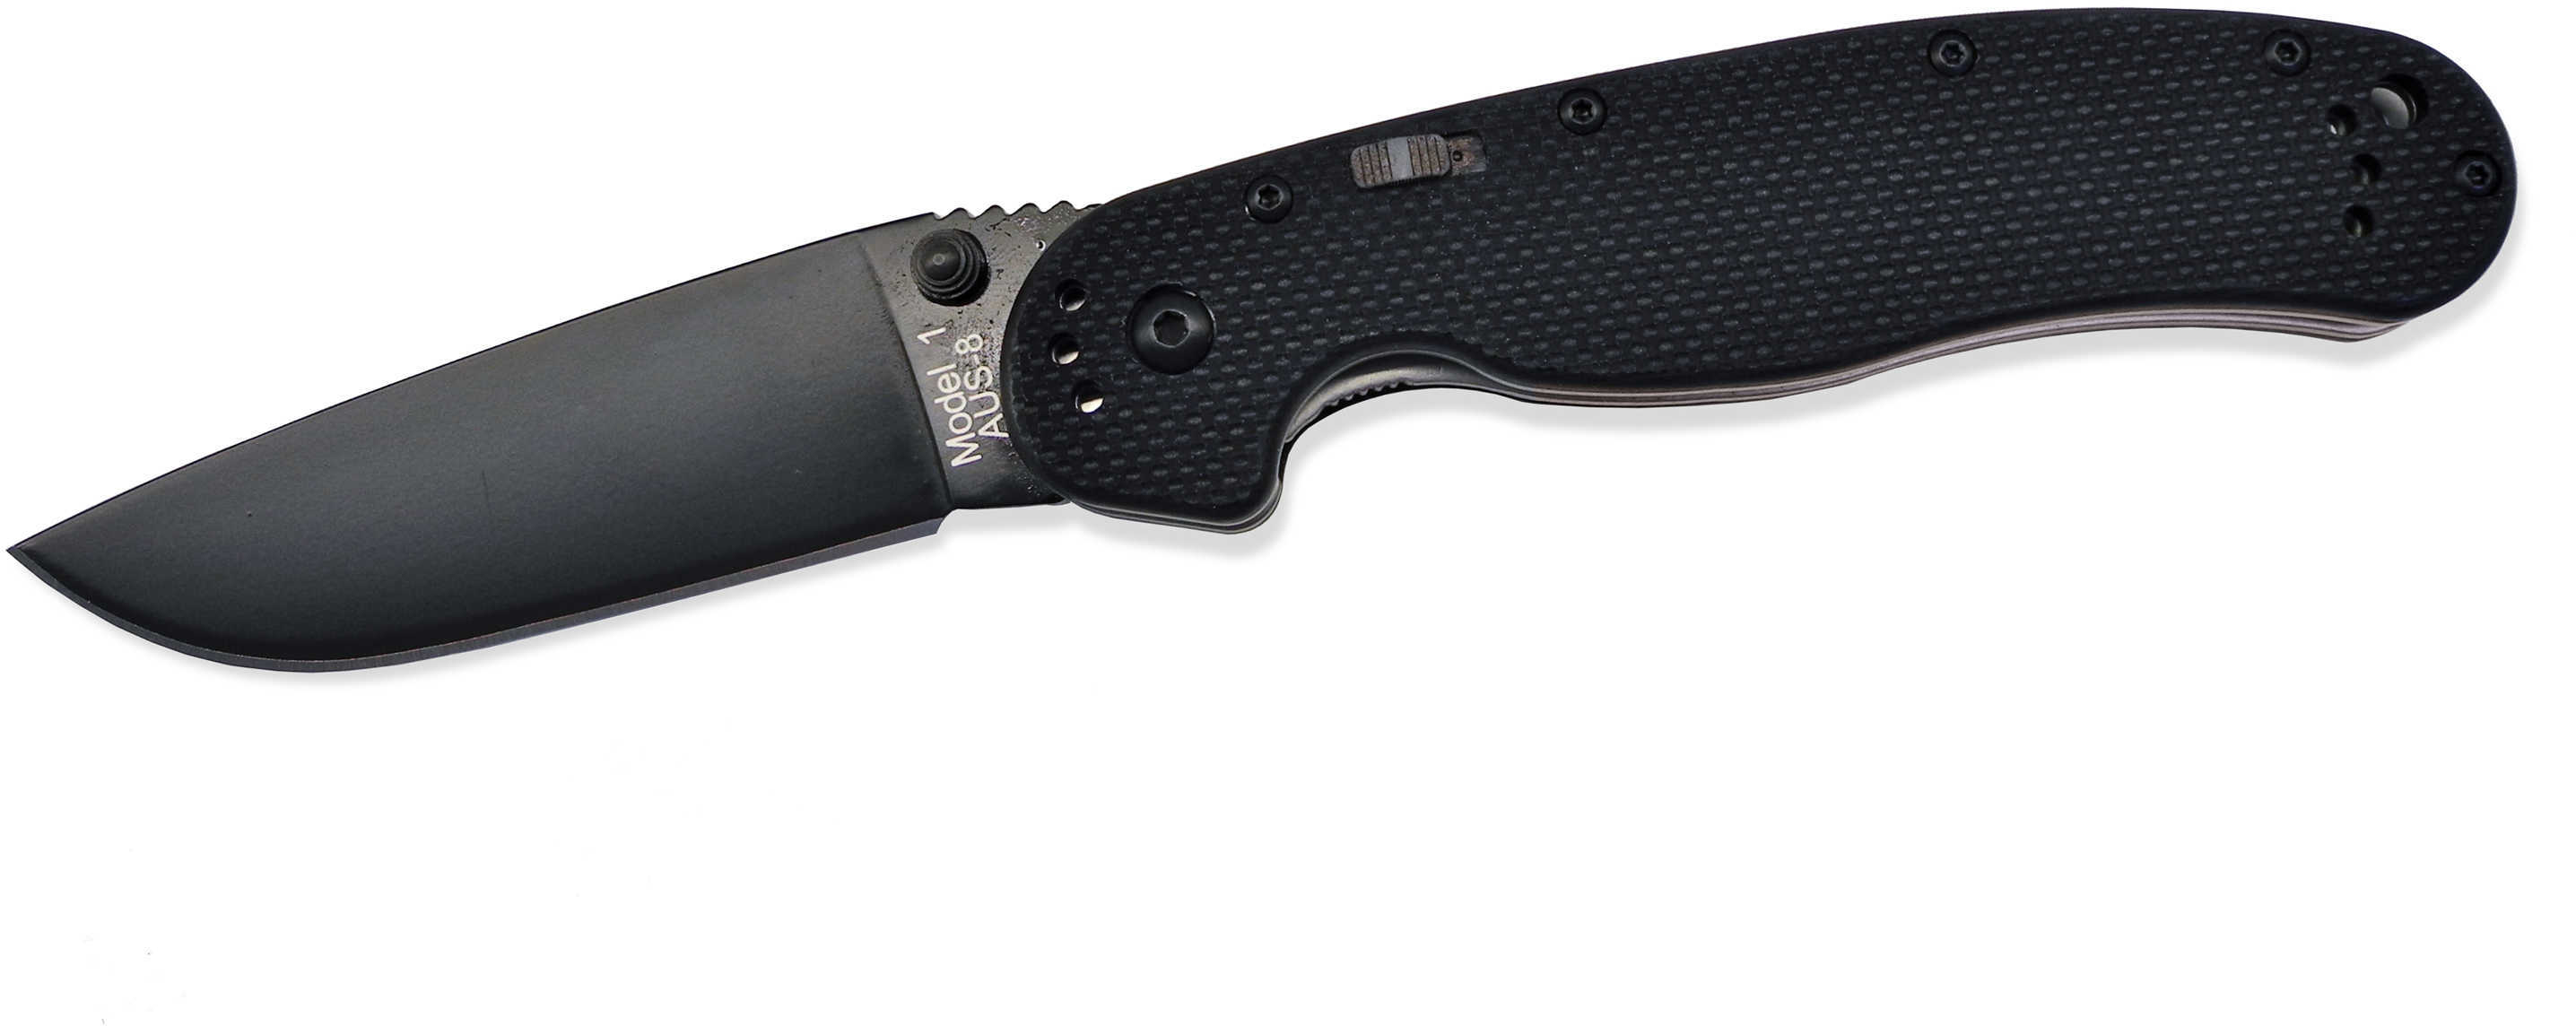 Ontario Knife Company RAT1A Assisted Opener BP Md: 8871